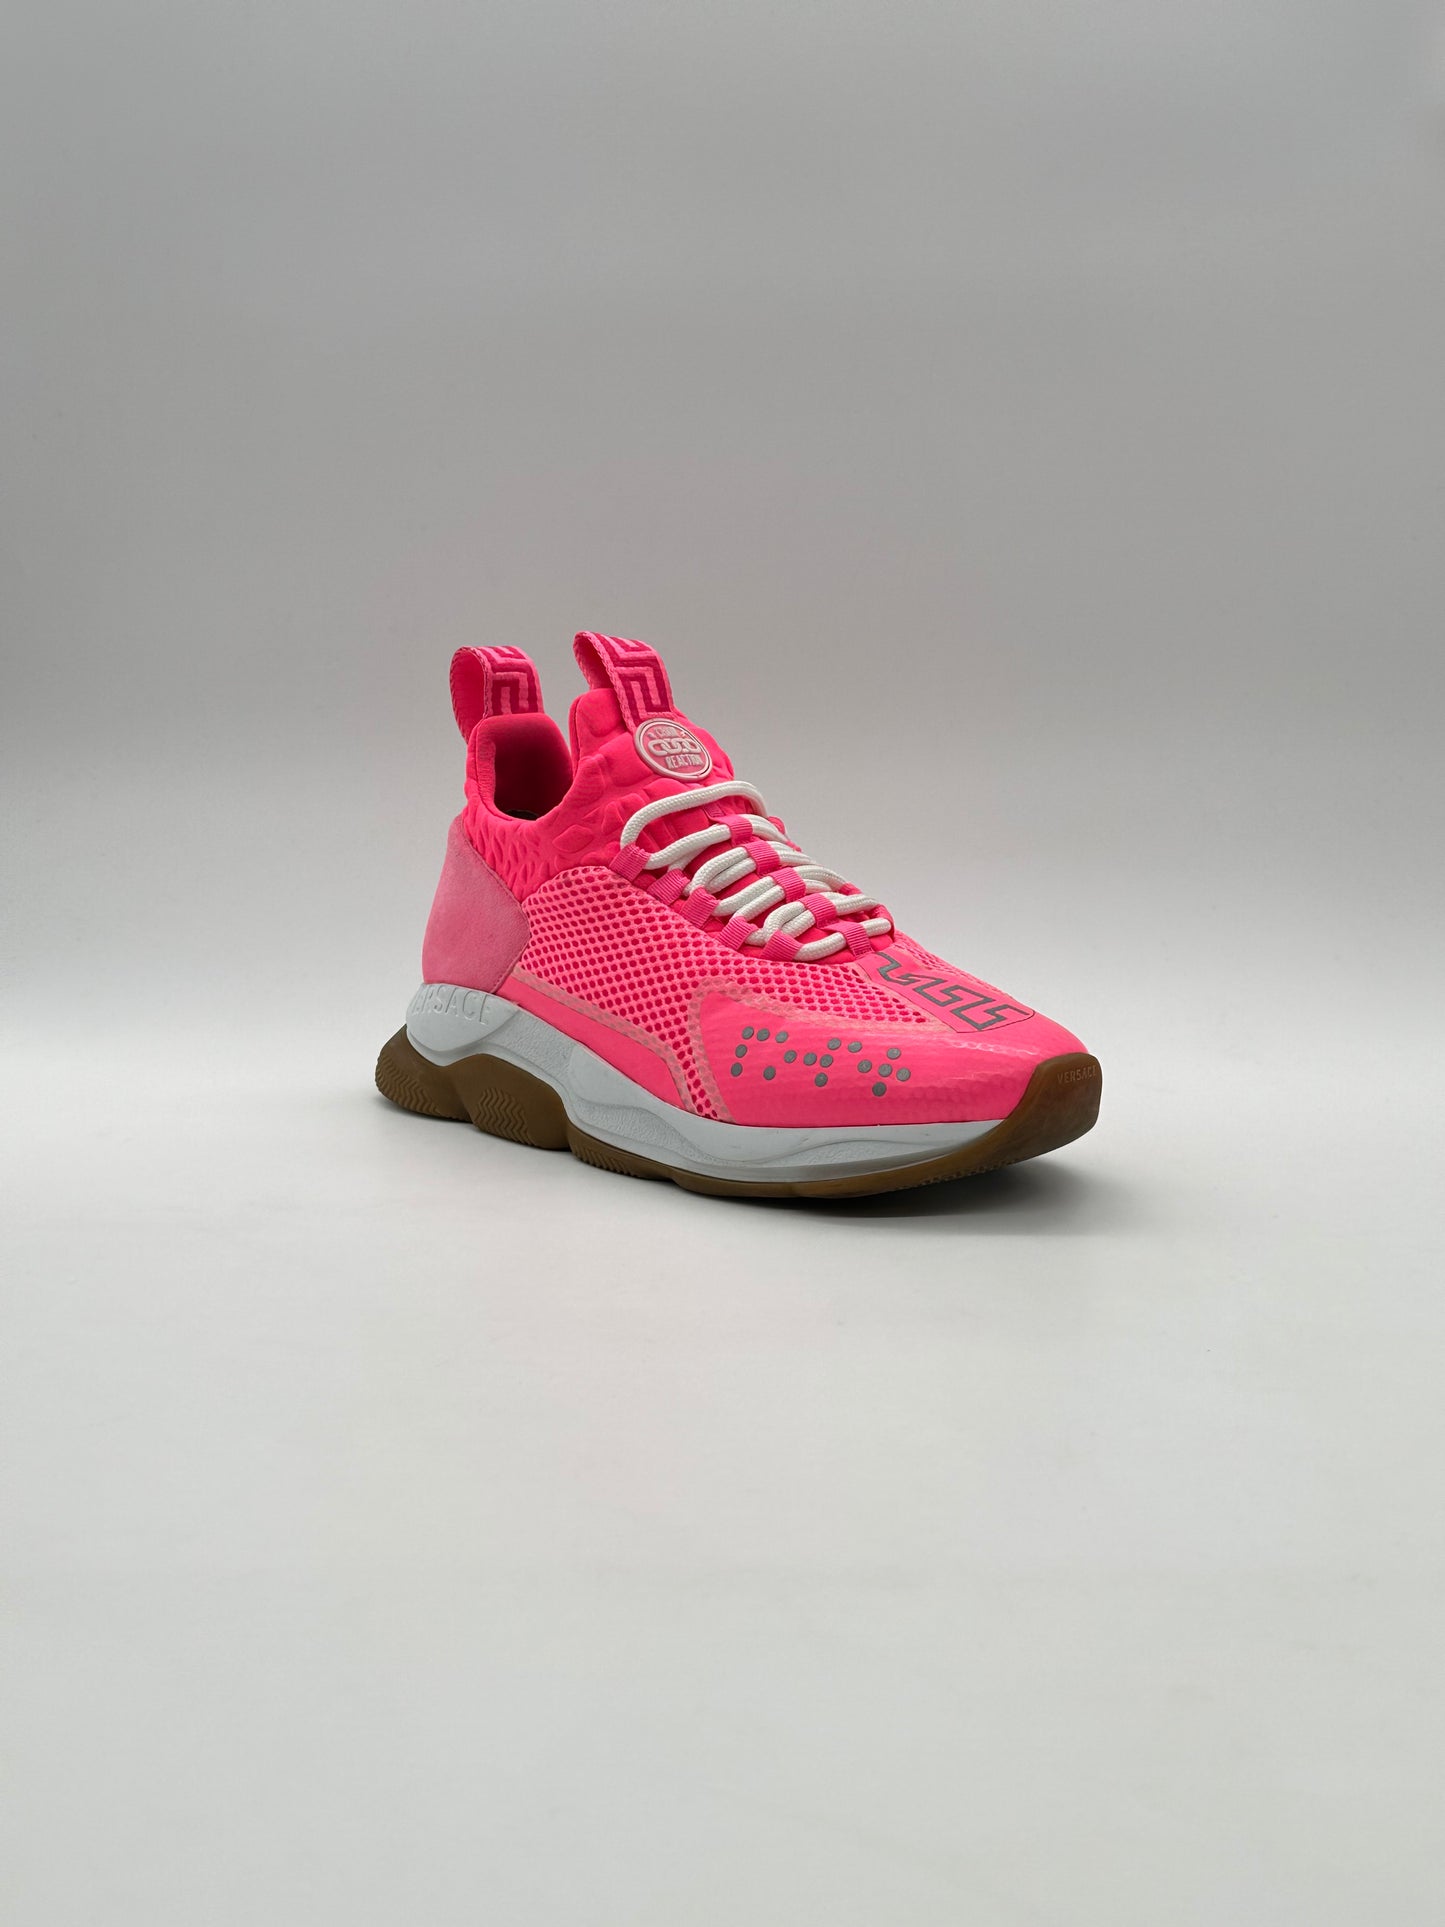 Neon Chain Reaction Sneakers